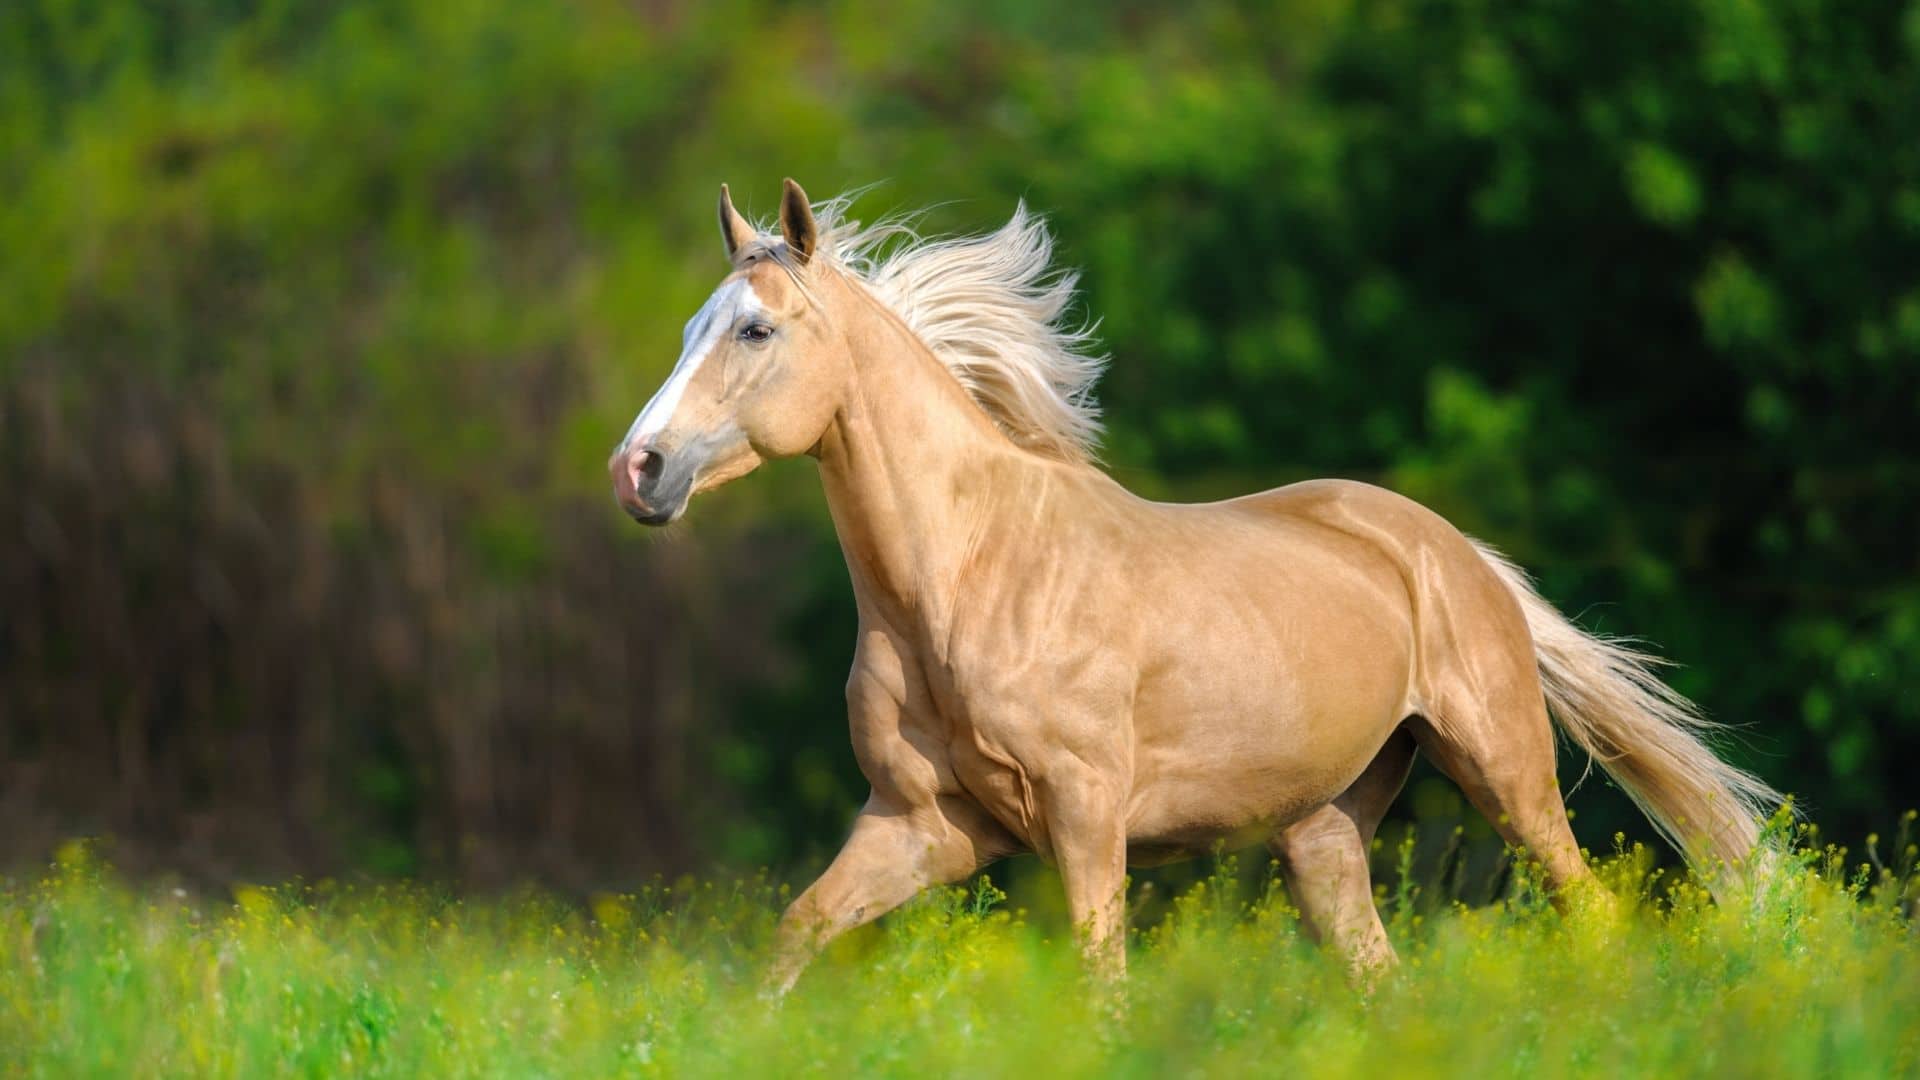 Are Palomino Horses a Breed, Expensive, Purebred, or a Color